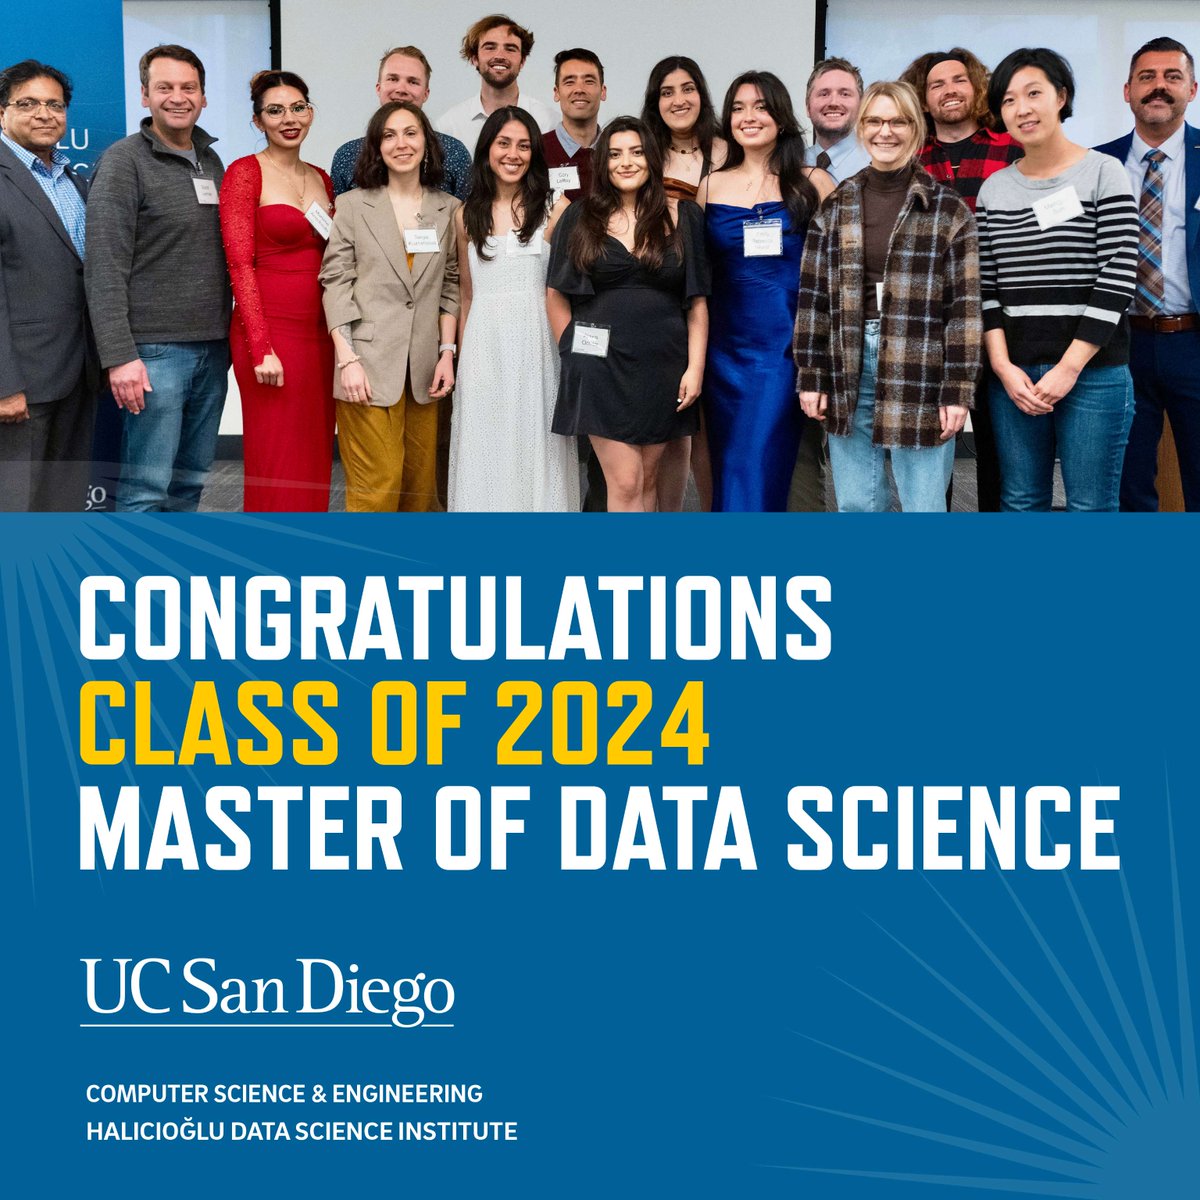 🎉 Congratulations to our Master of Data Science Class of 2024 Graduates! Your hard work has paid off, and we’re thrilled to see how you’ll use your skills to chart new territories in data science. The future is bright! 💡✨ #HDSI #UCSD #DataScience #Graduation